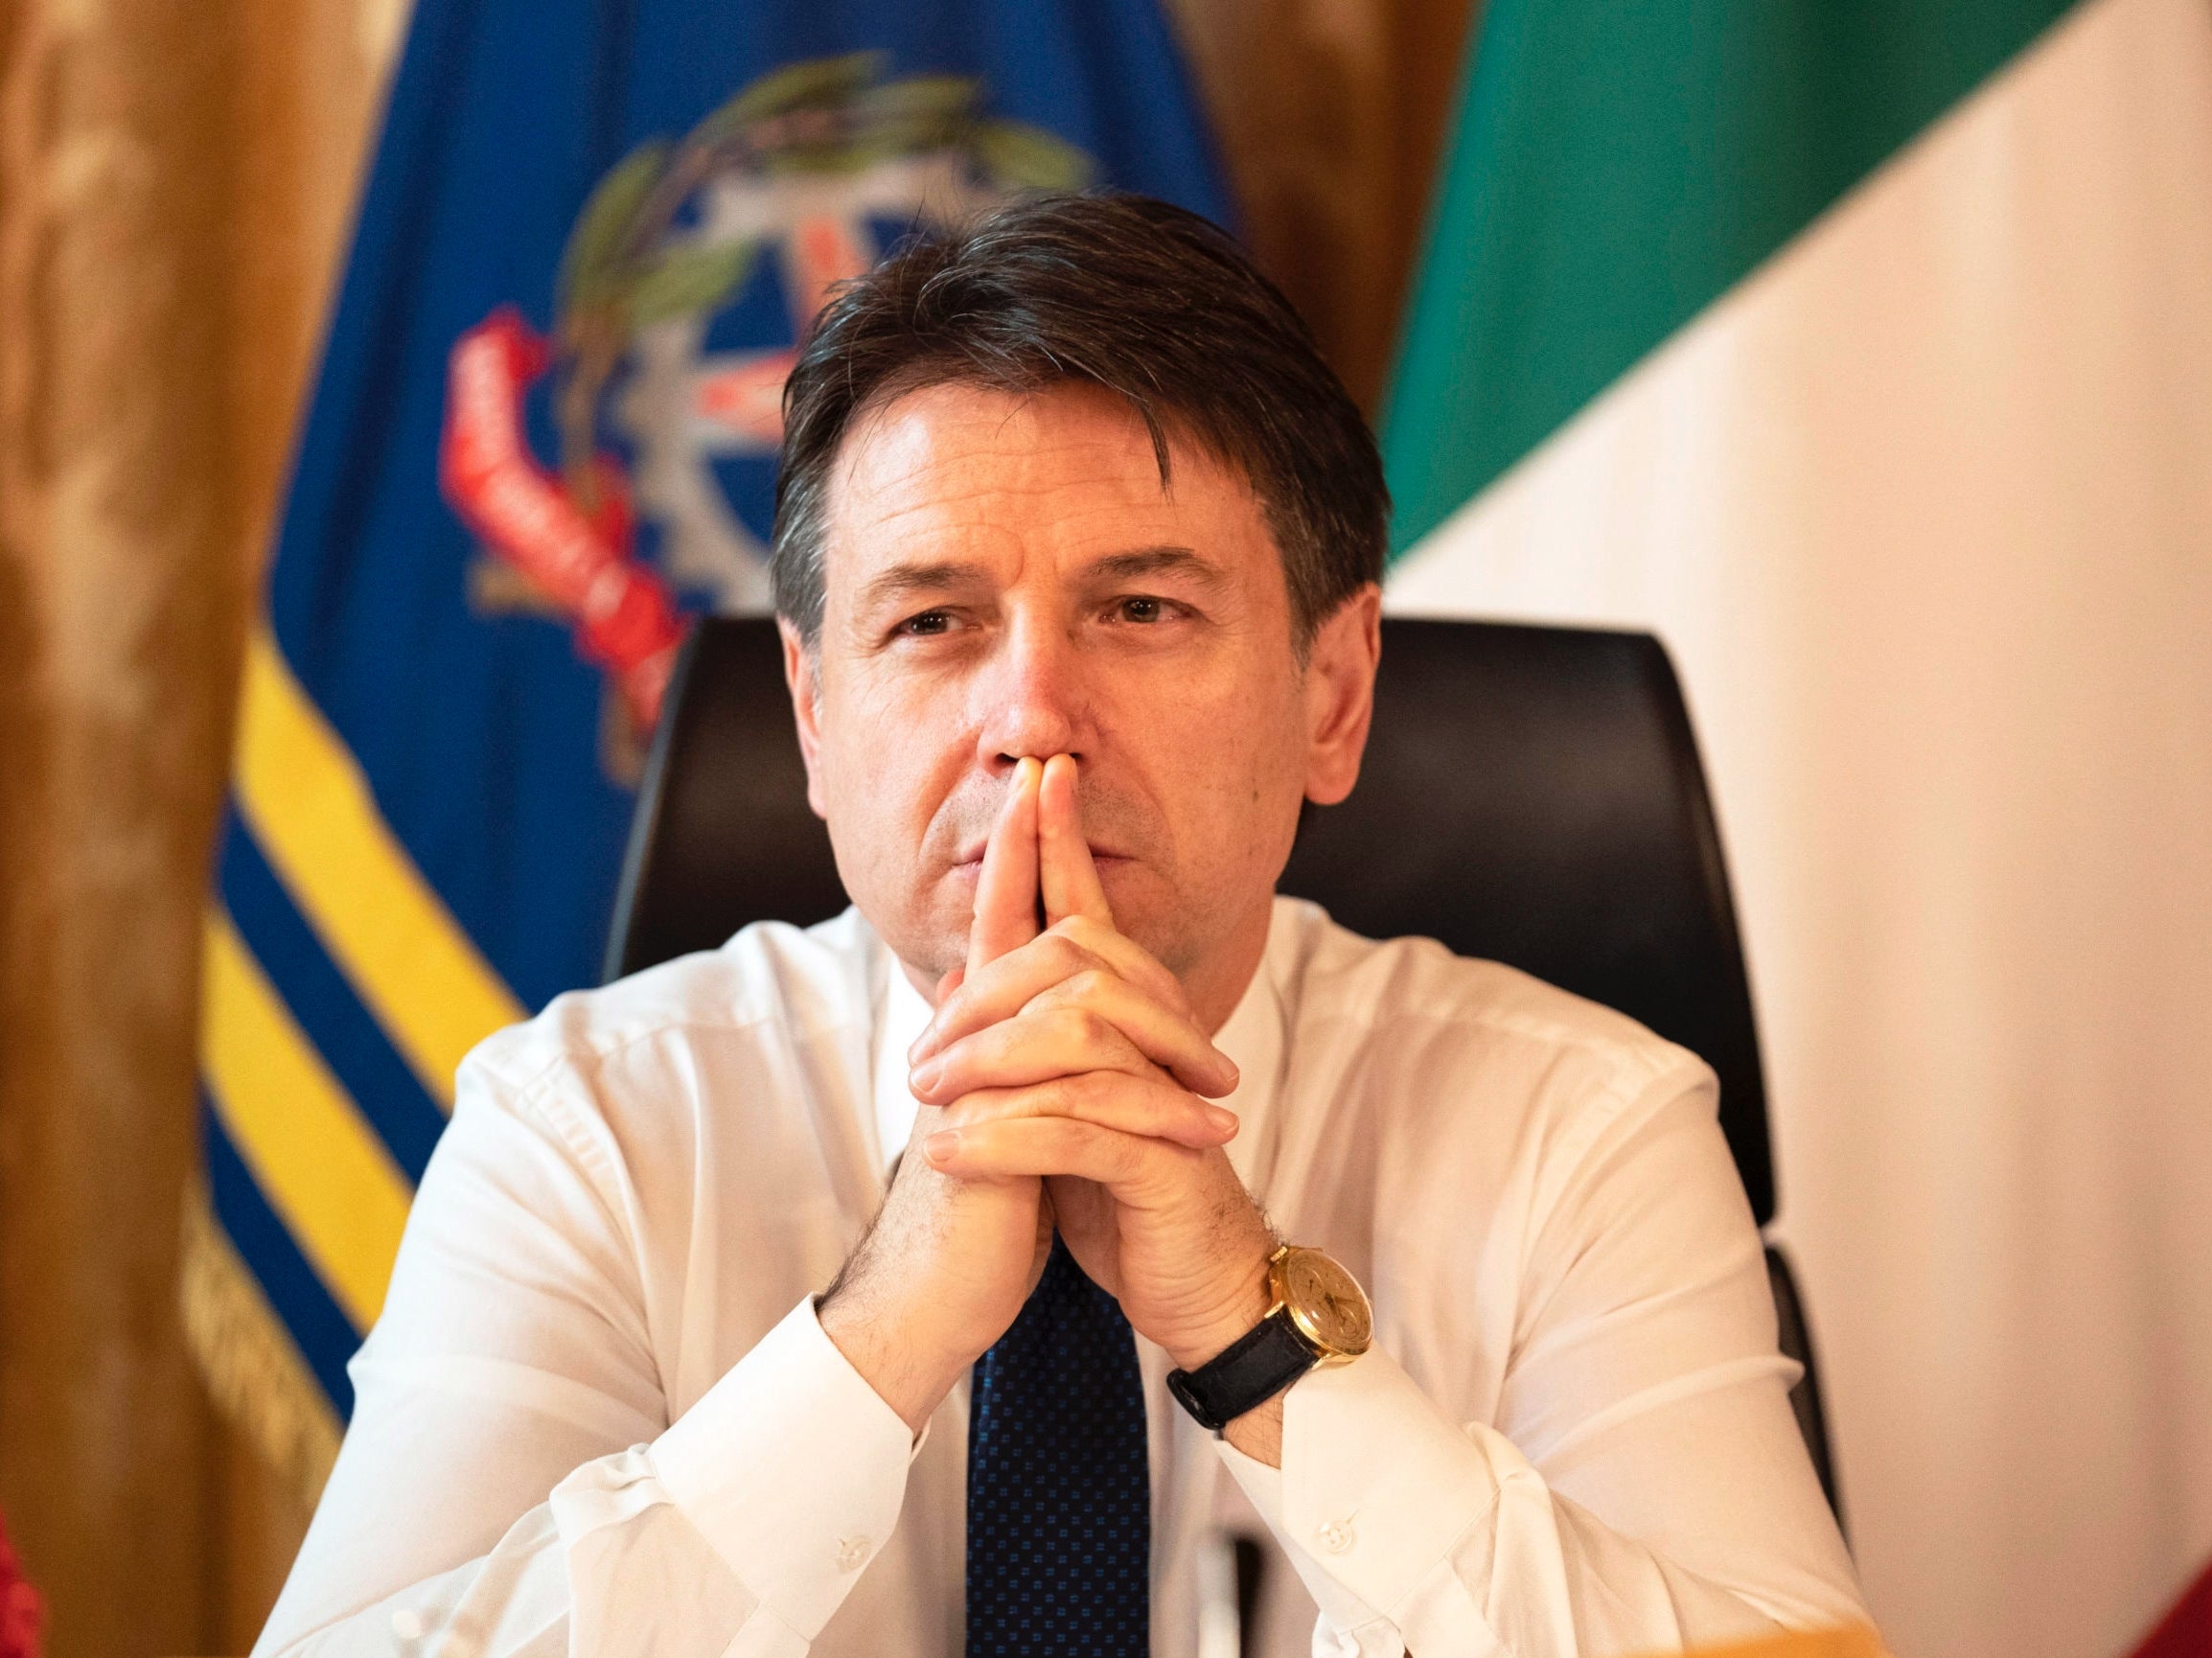 Giuseppe Conte in his office at Chigi Palace, Rome